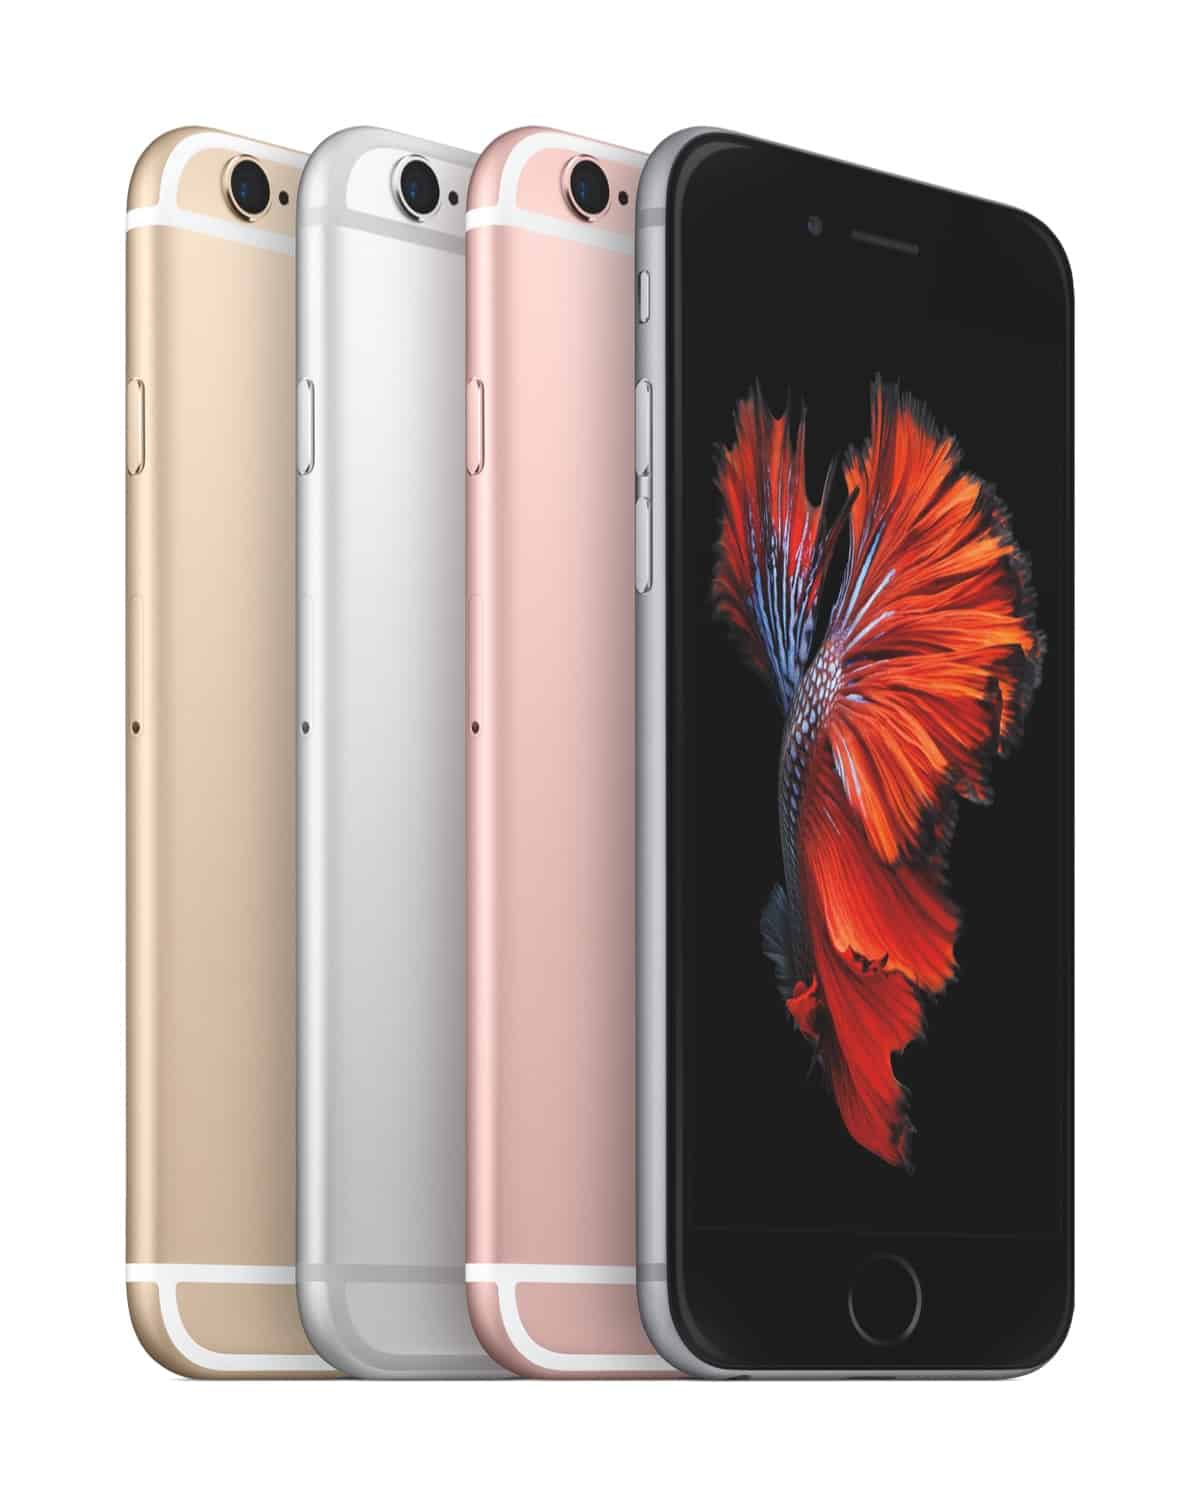 iPhone 6s colors